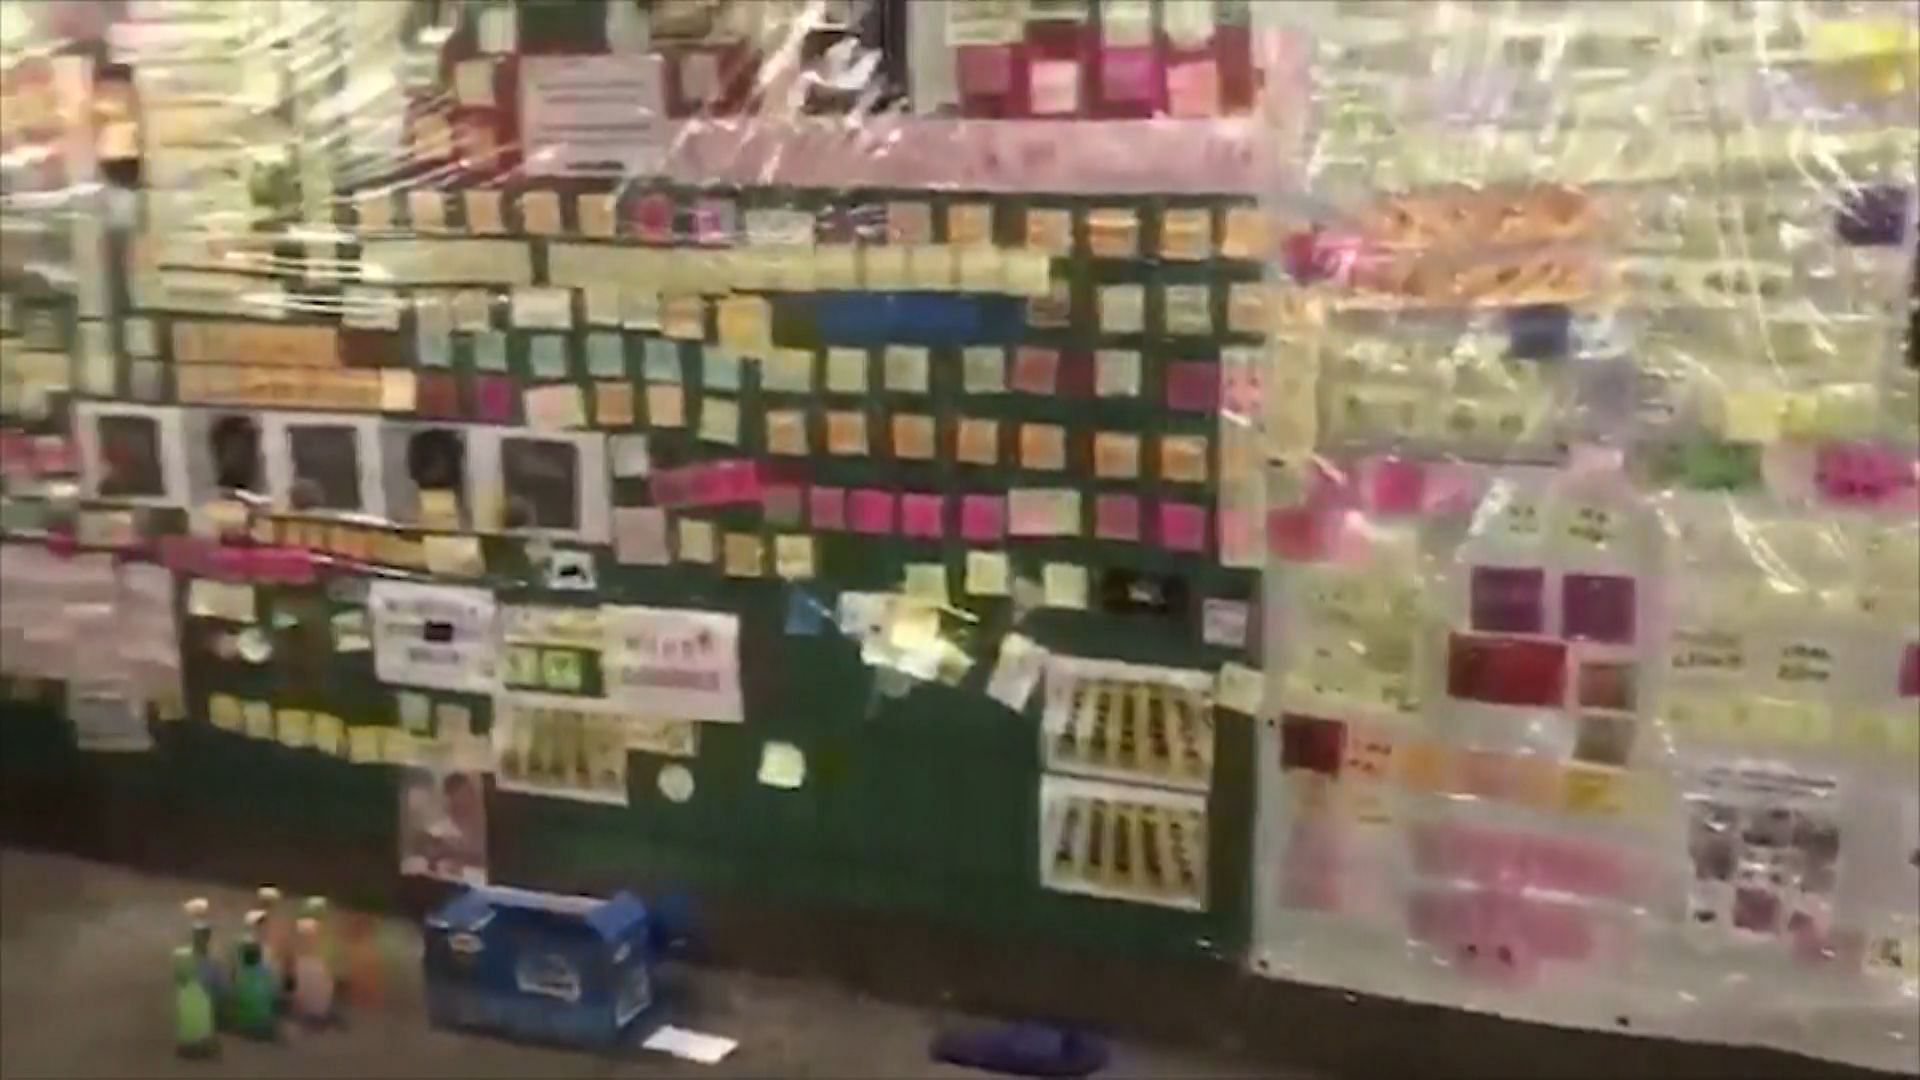 In Hong Kong, colourful notes on walls inspired by Prague’s famous ‘Lennon Wall’ have emerged outside the city’s parliament.